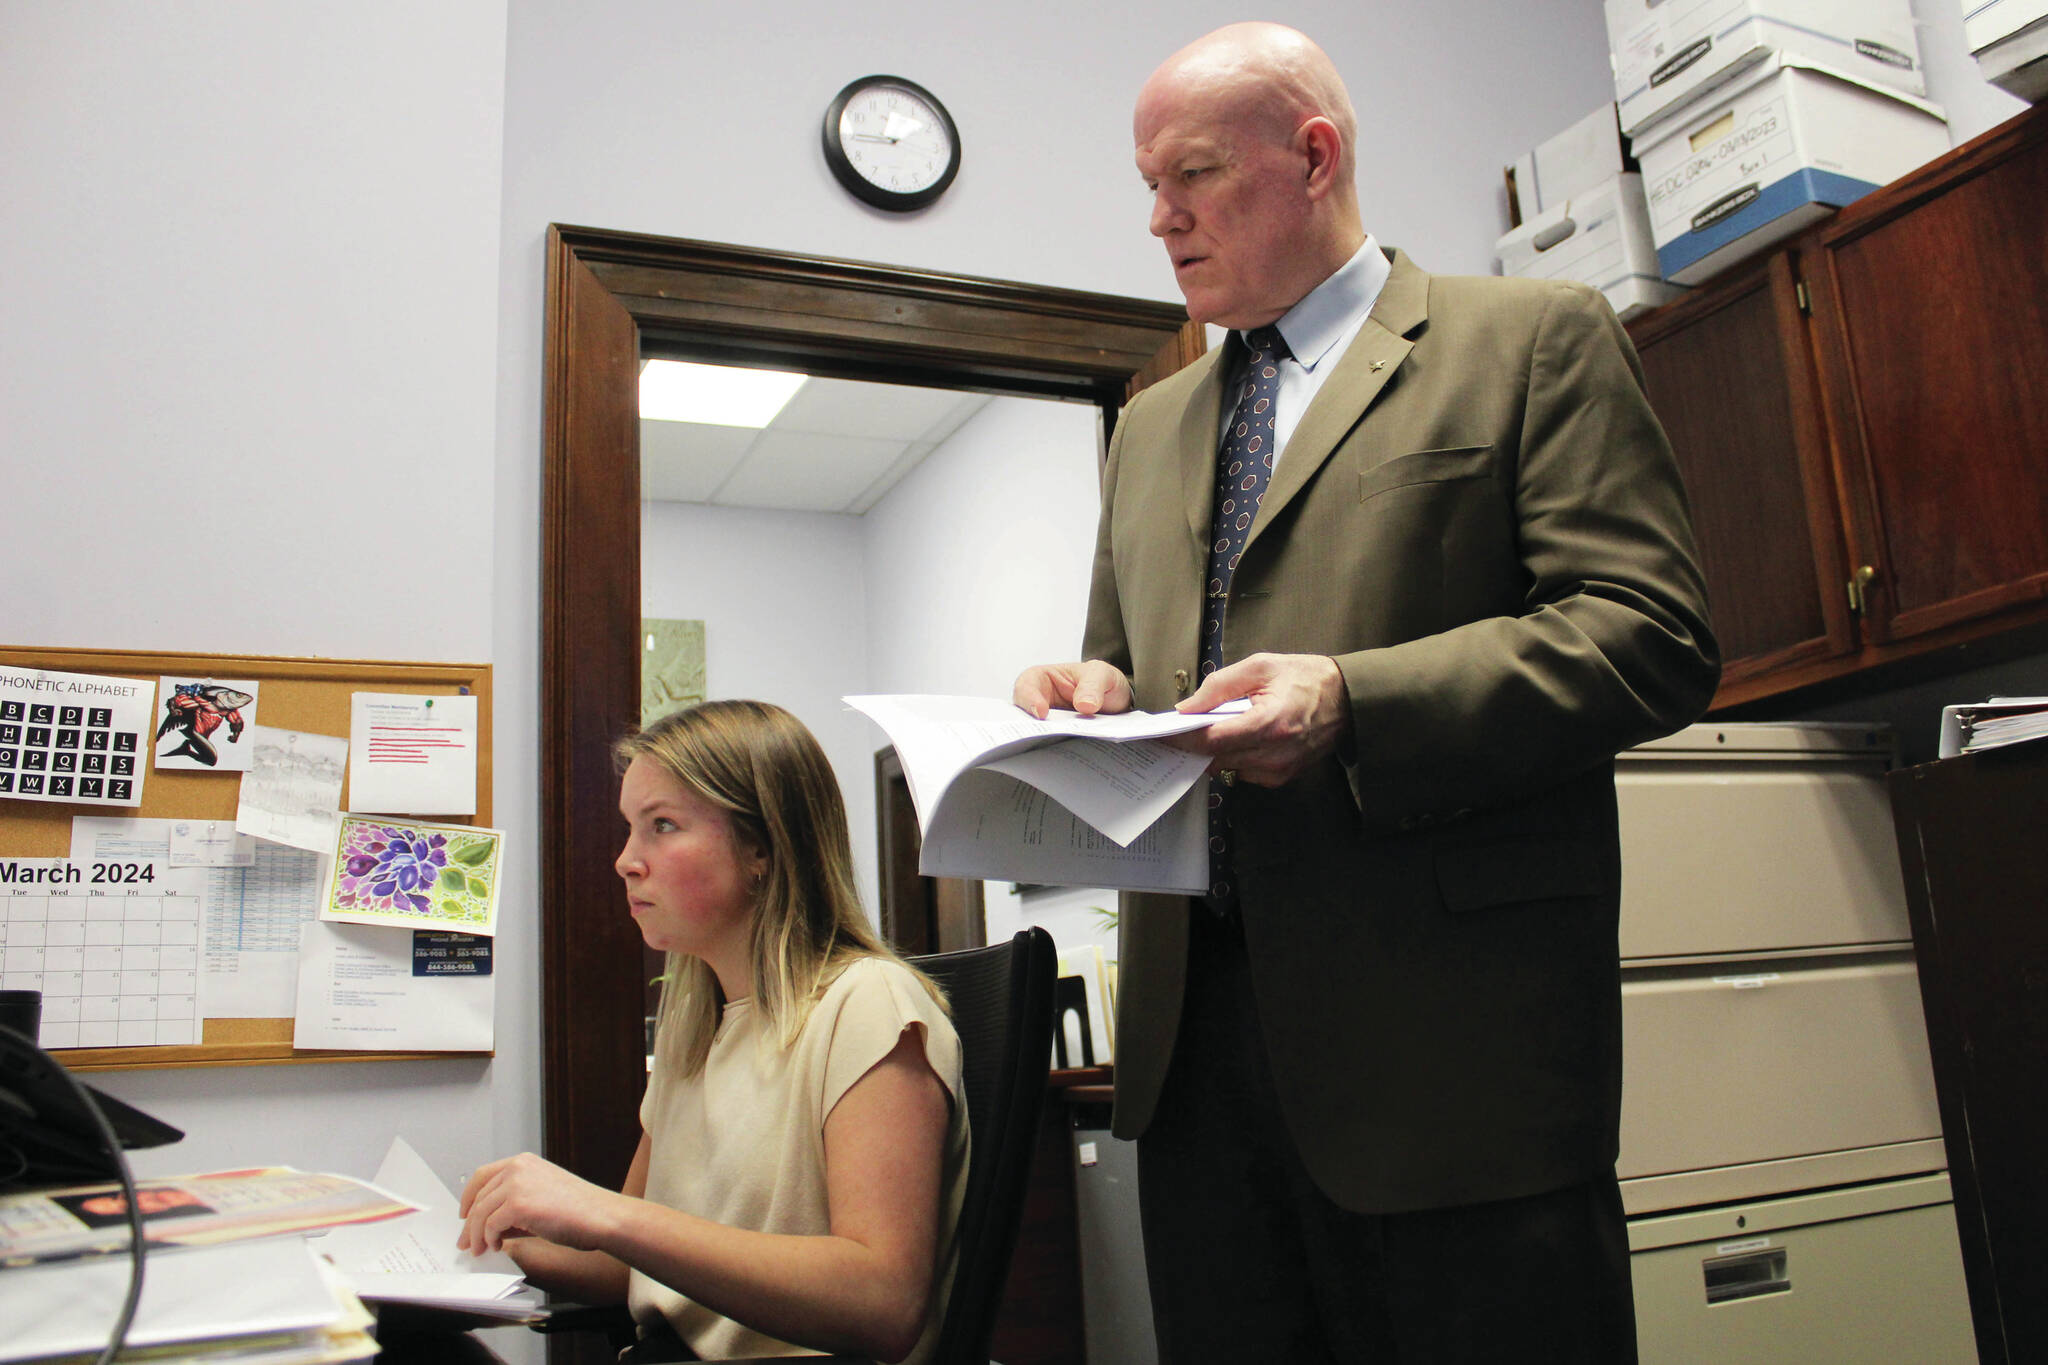 Ashlyn O’Hara/Peninsula Clarion
Bud Sexton, chief of staff for Alaska House Rep. Justin Ruffridge, and aide Sabina Braun, left, review amendment language in their office at the Alaska State Capitol building on Wednesday in Juneau.